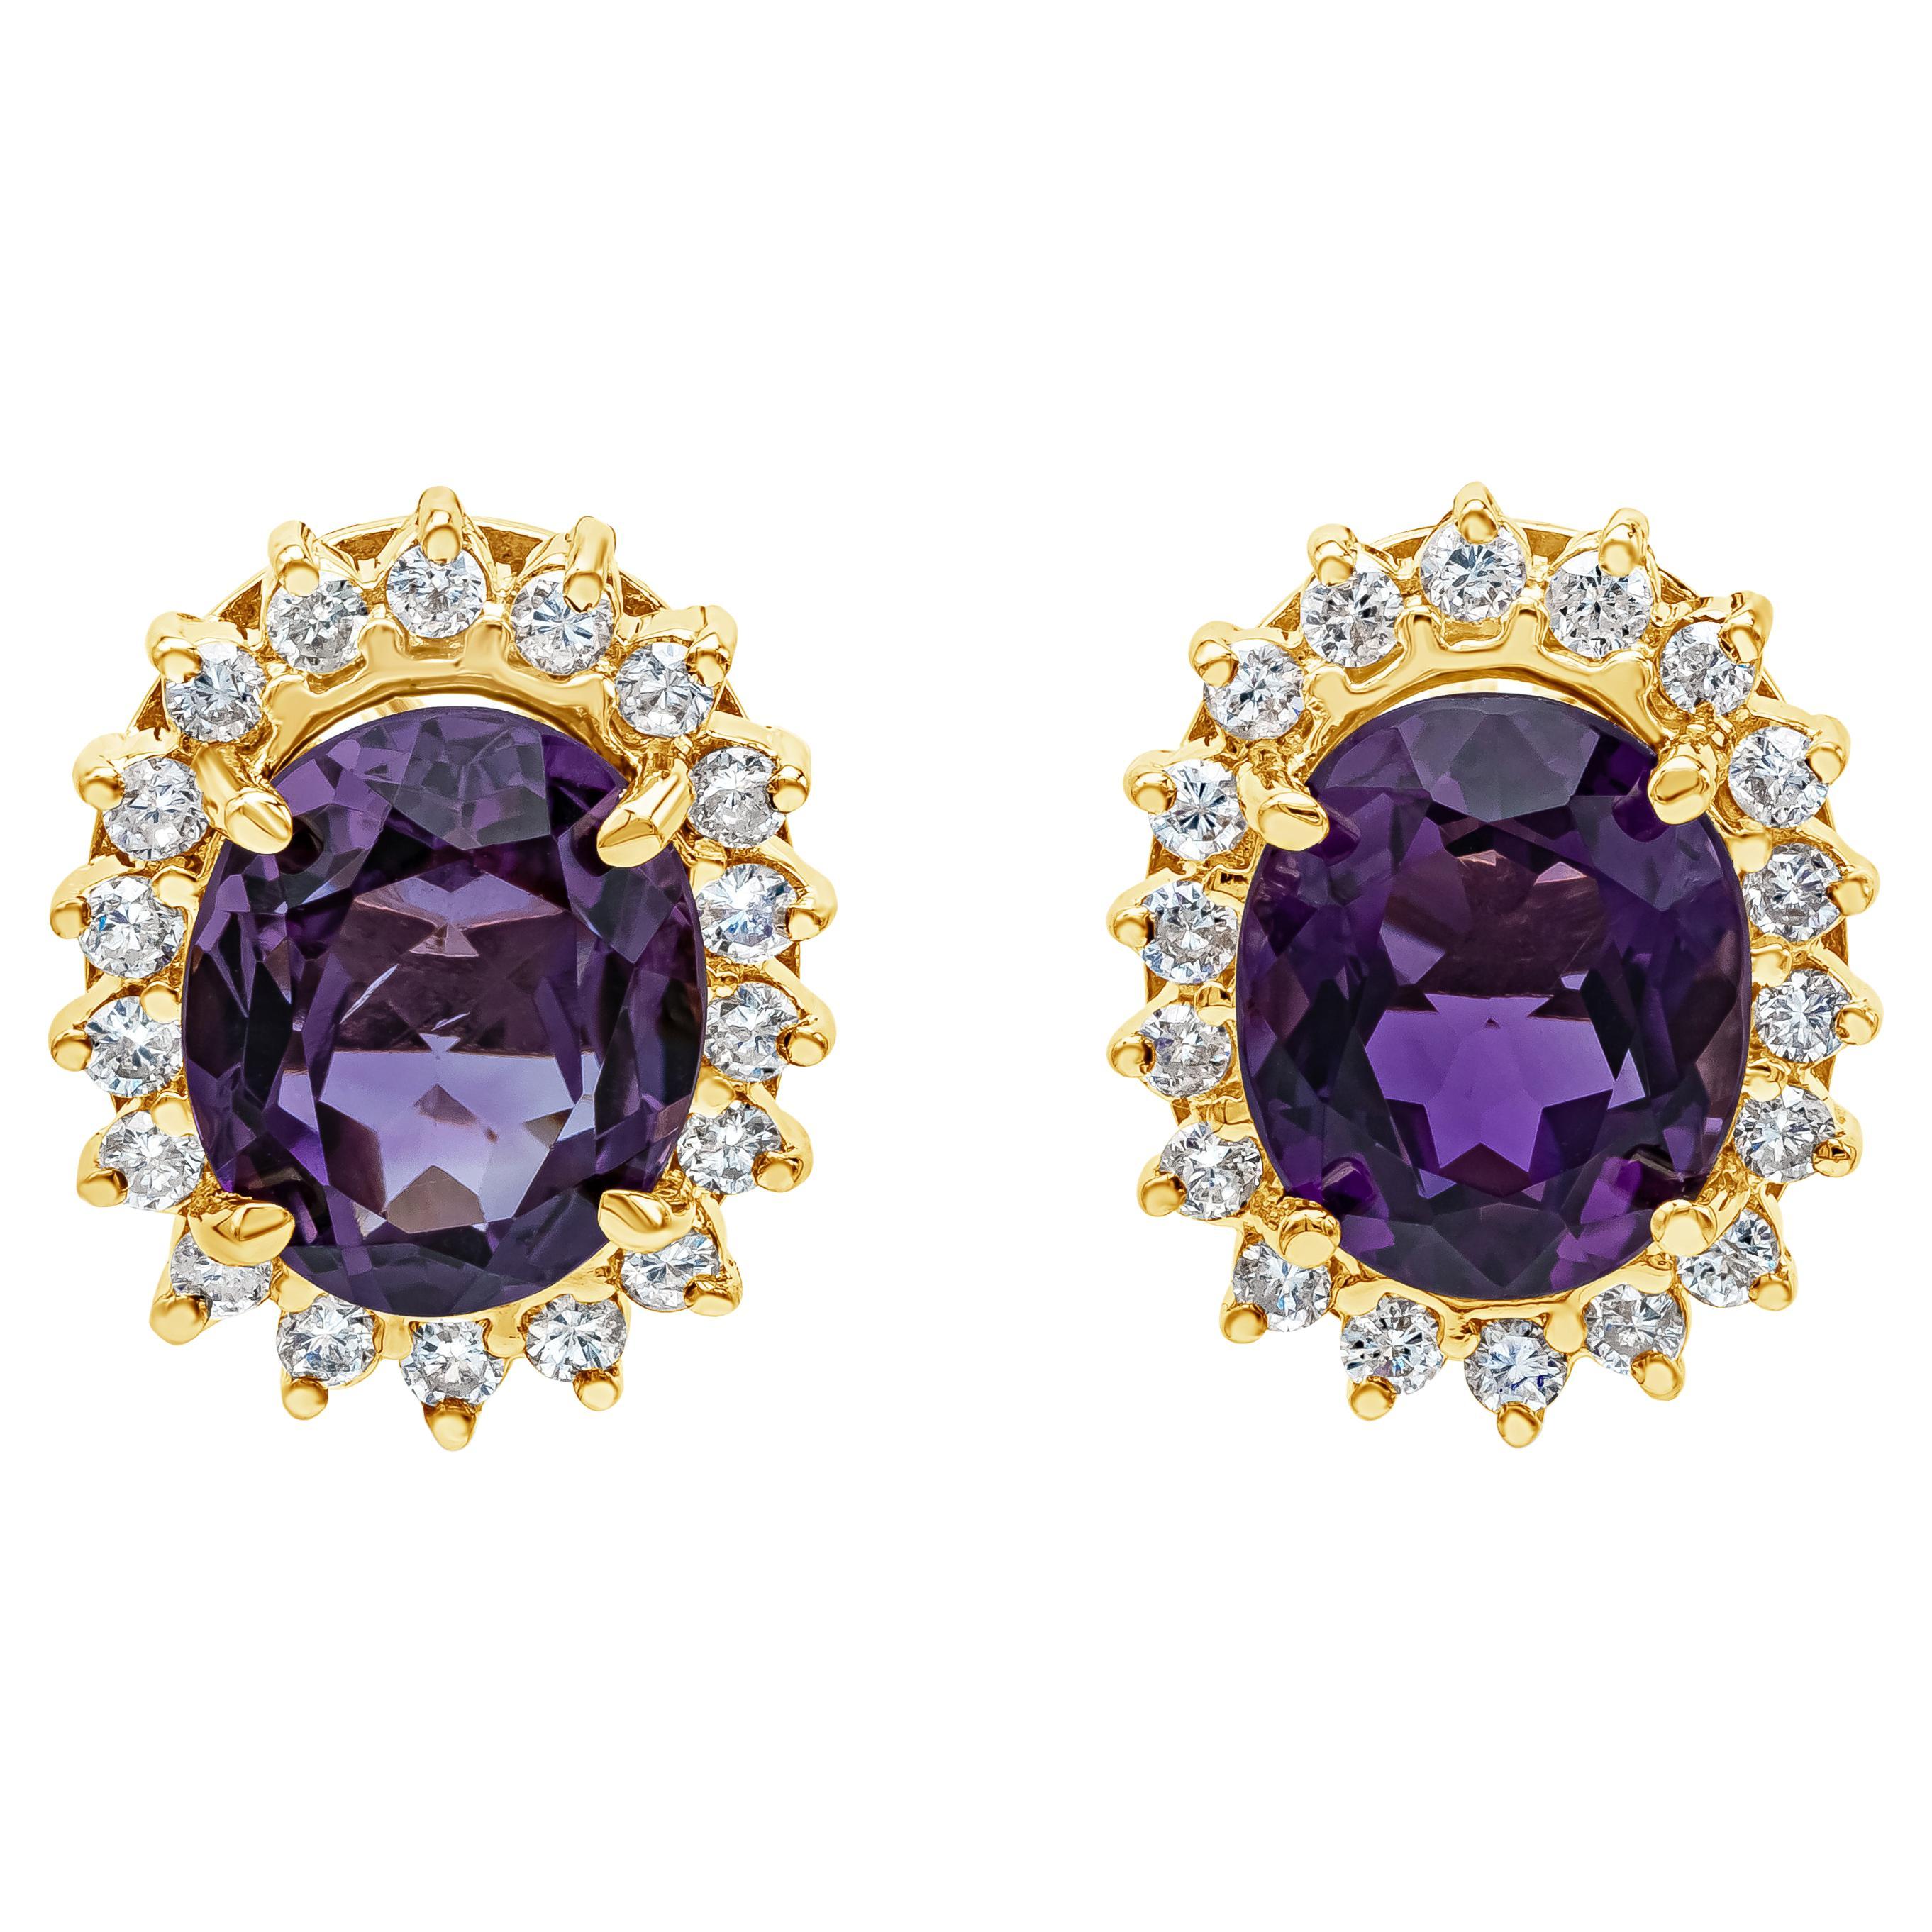 9.00 Carats Total Oval Cut Amethyst and Round Diamond Halo Clip-on Earrings